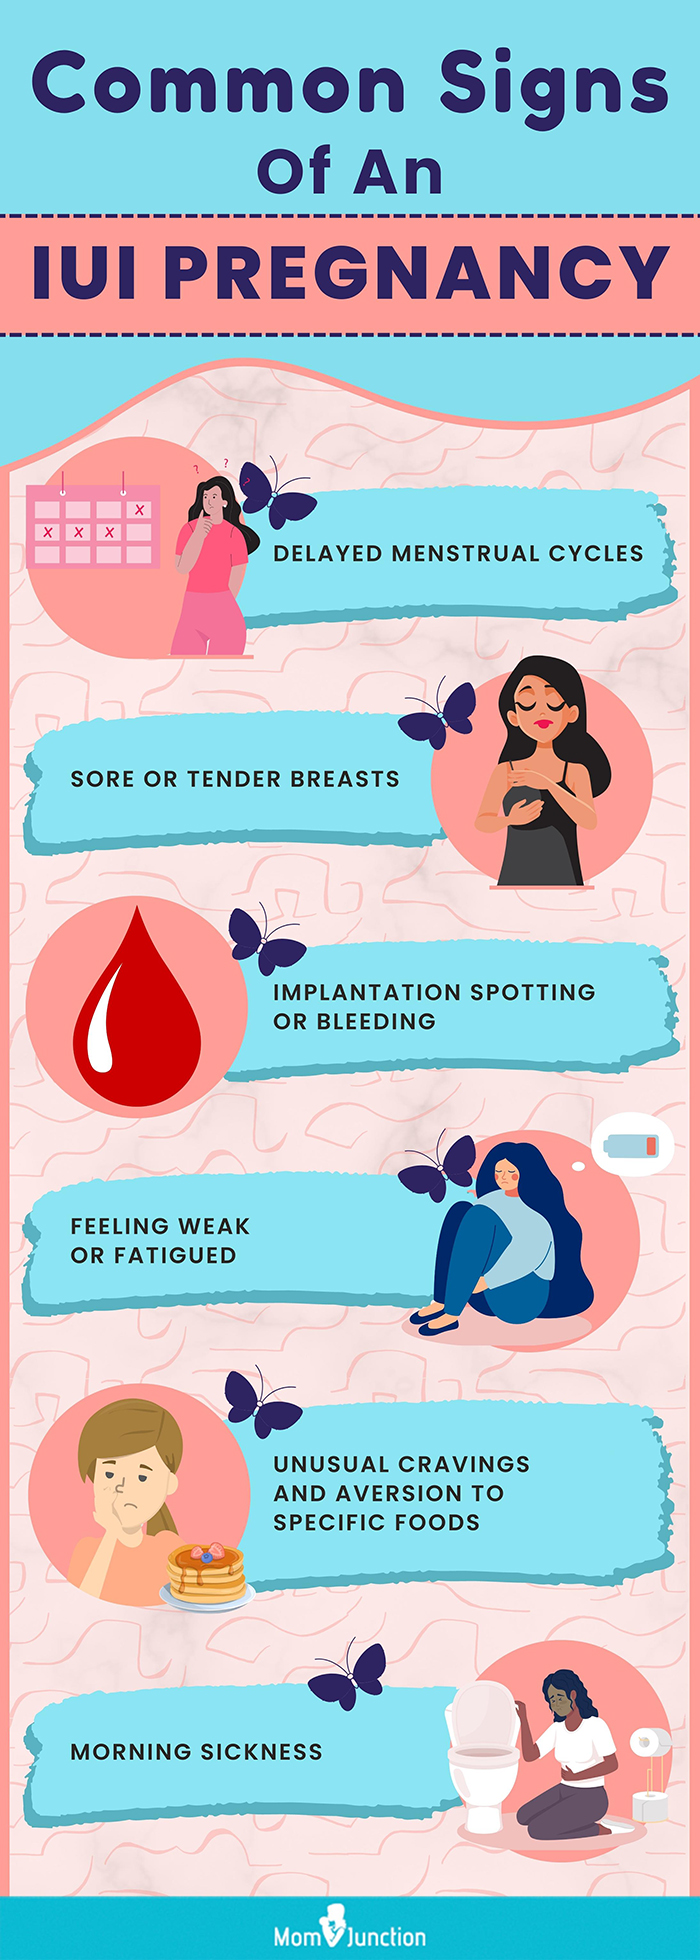 common signs of an iui pregnancy (infographic)